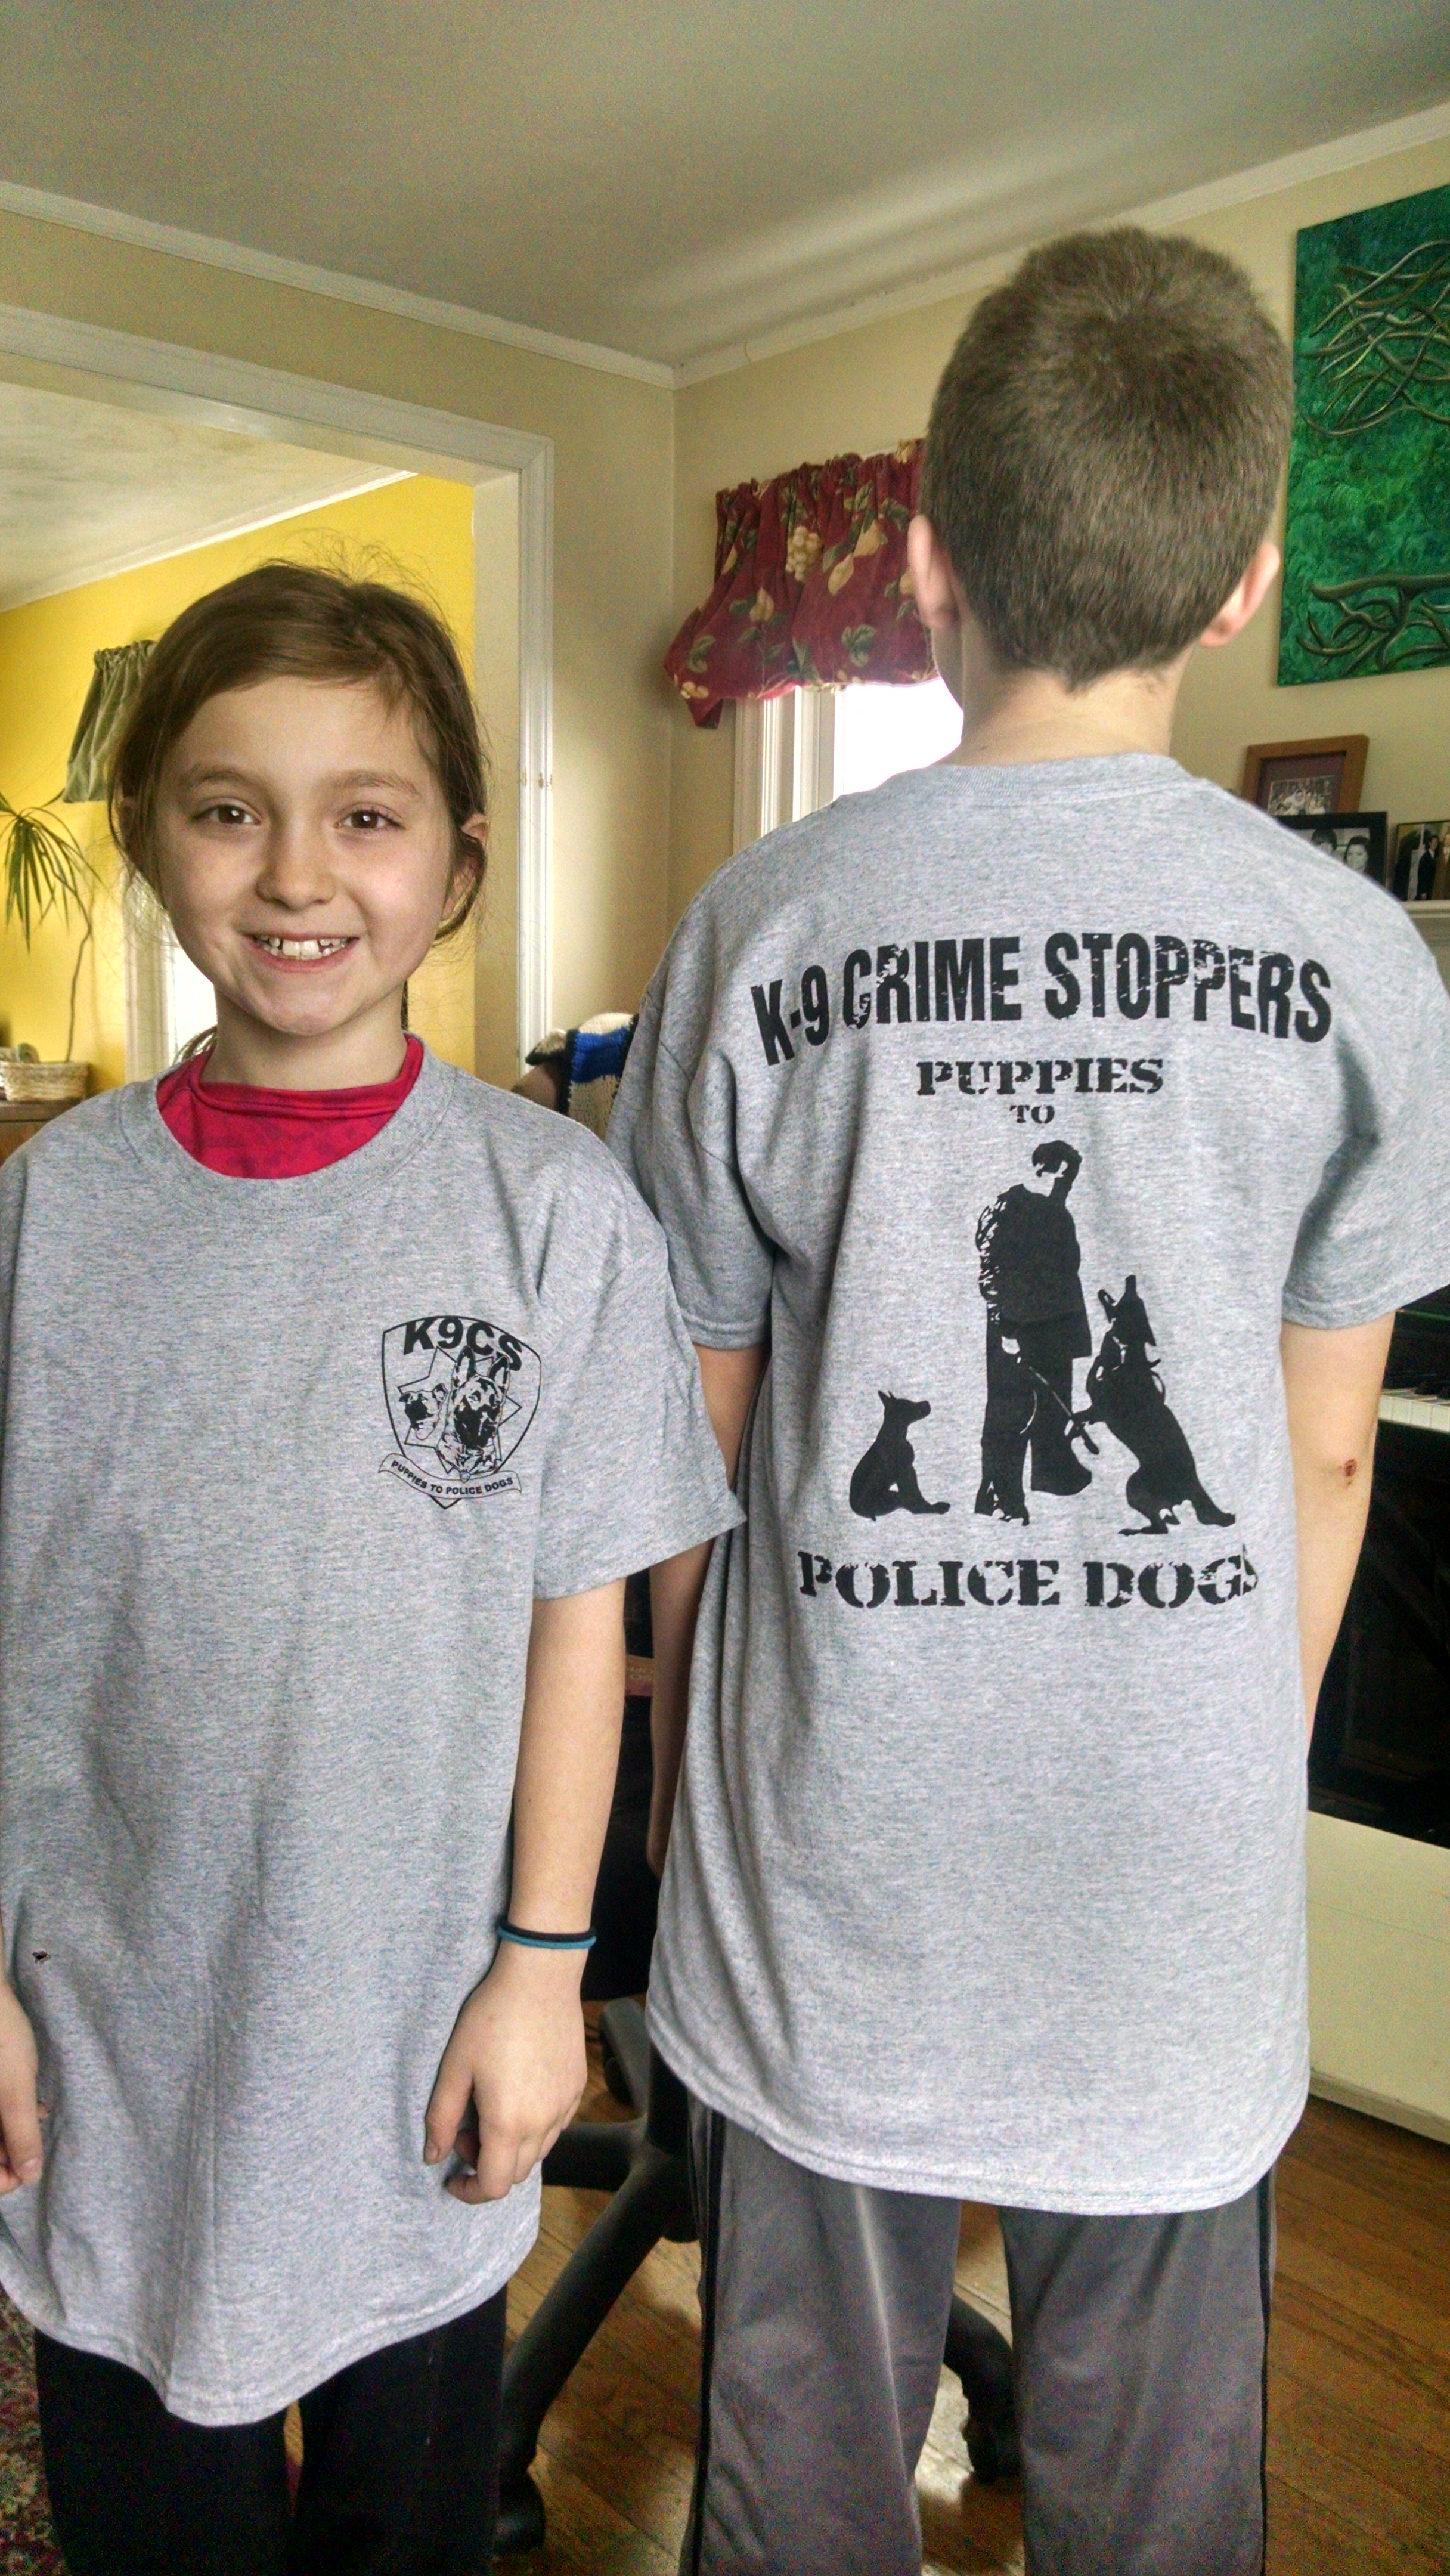 K-9 CRIME STOPPERS t-shirts finally available!